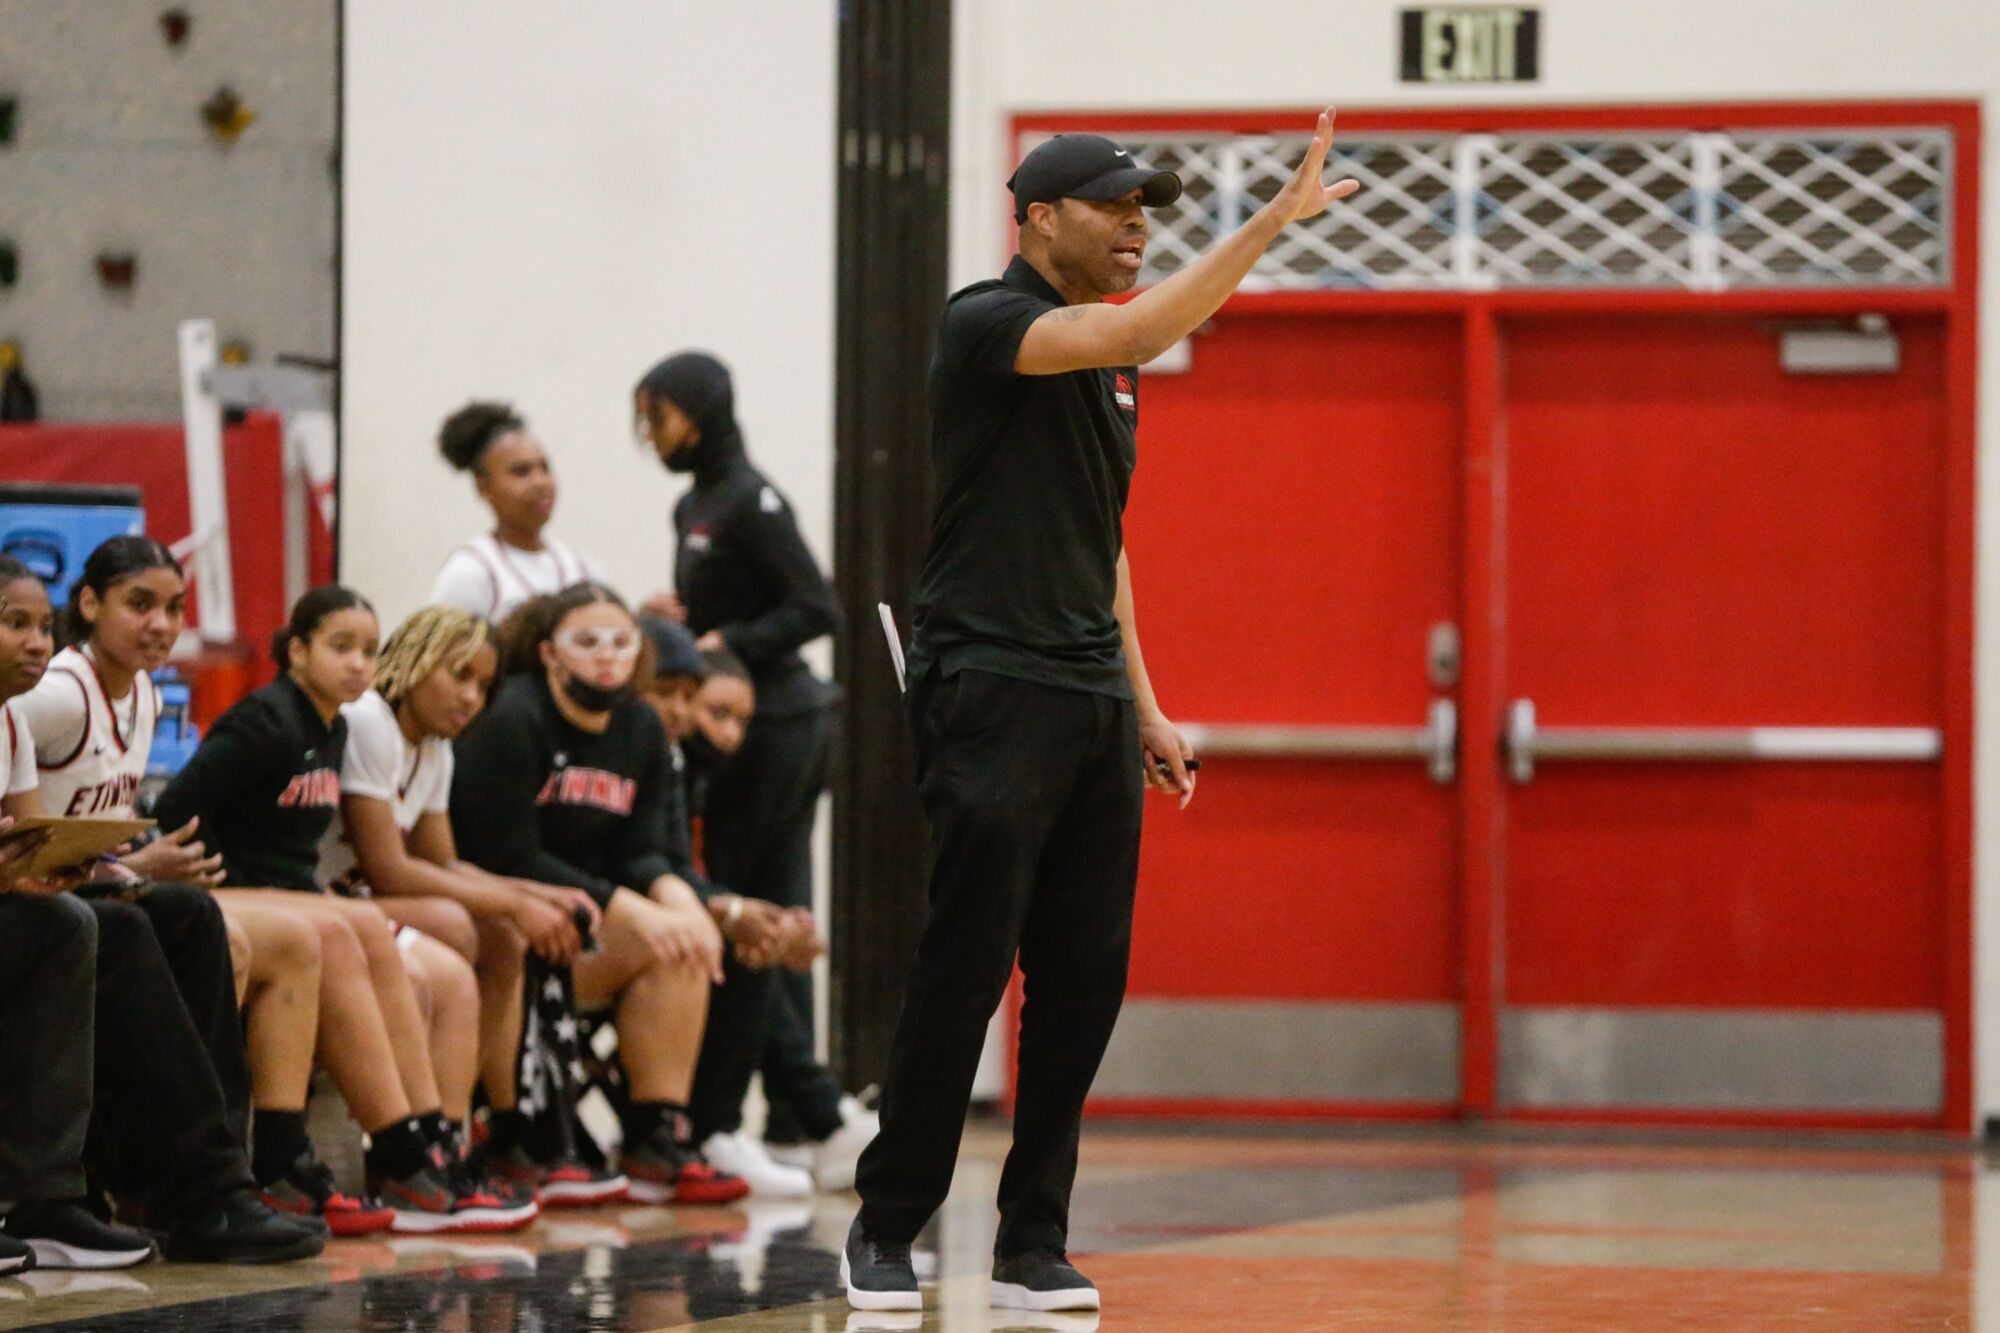 Etiwanda coach Stan Delus gives instructions to his players on the court from the sideline.